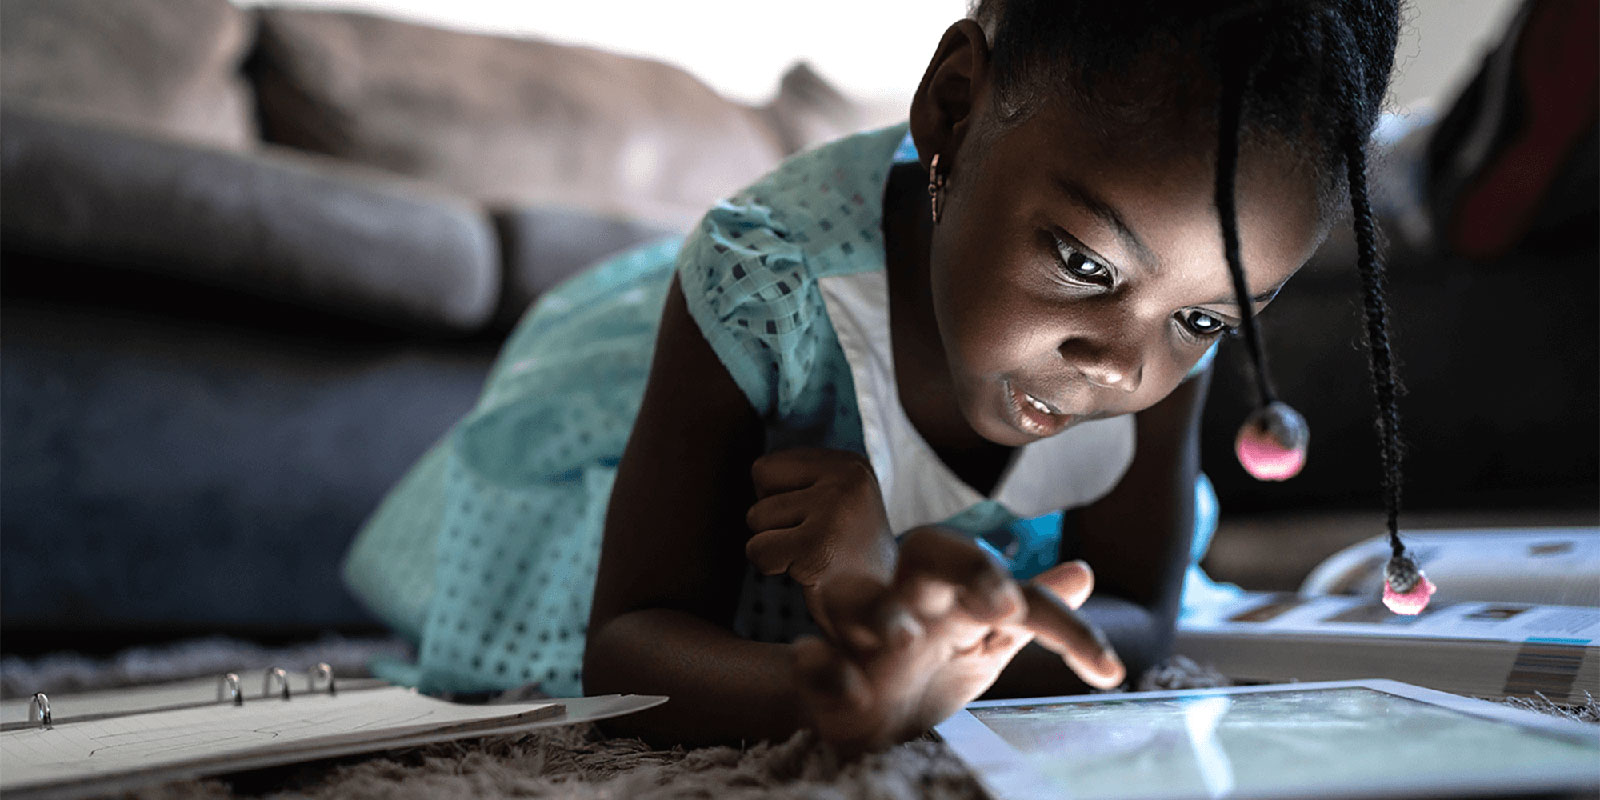 Young child using a tablet device